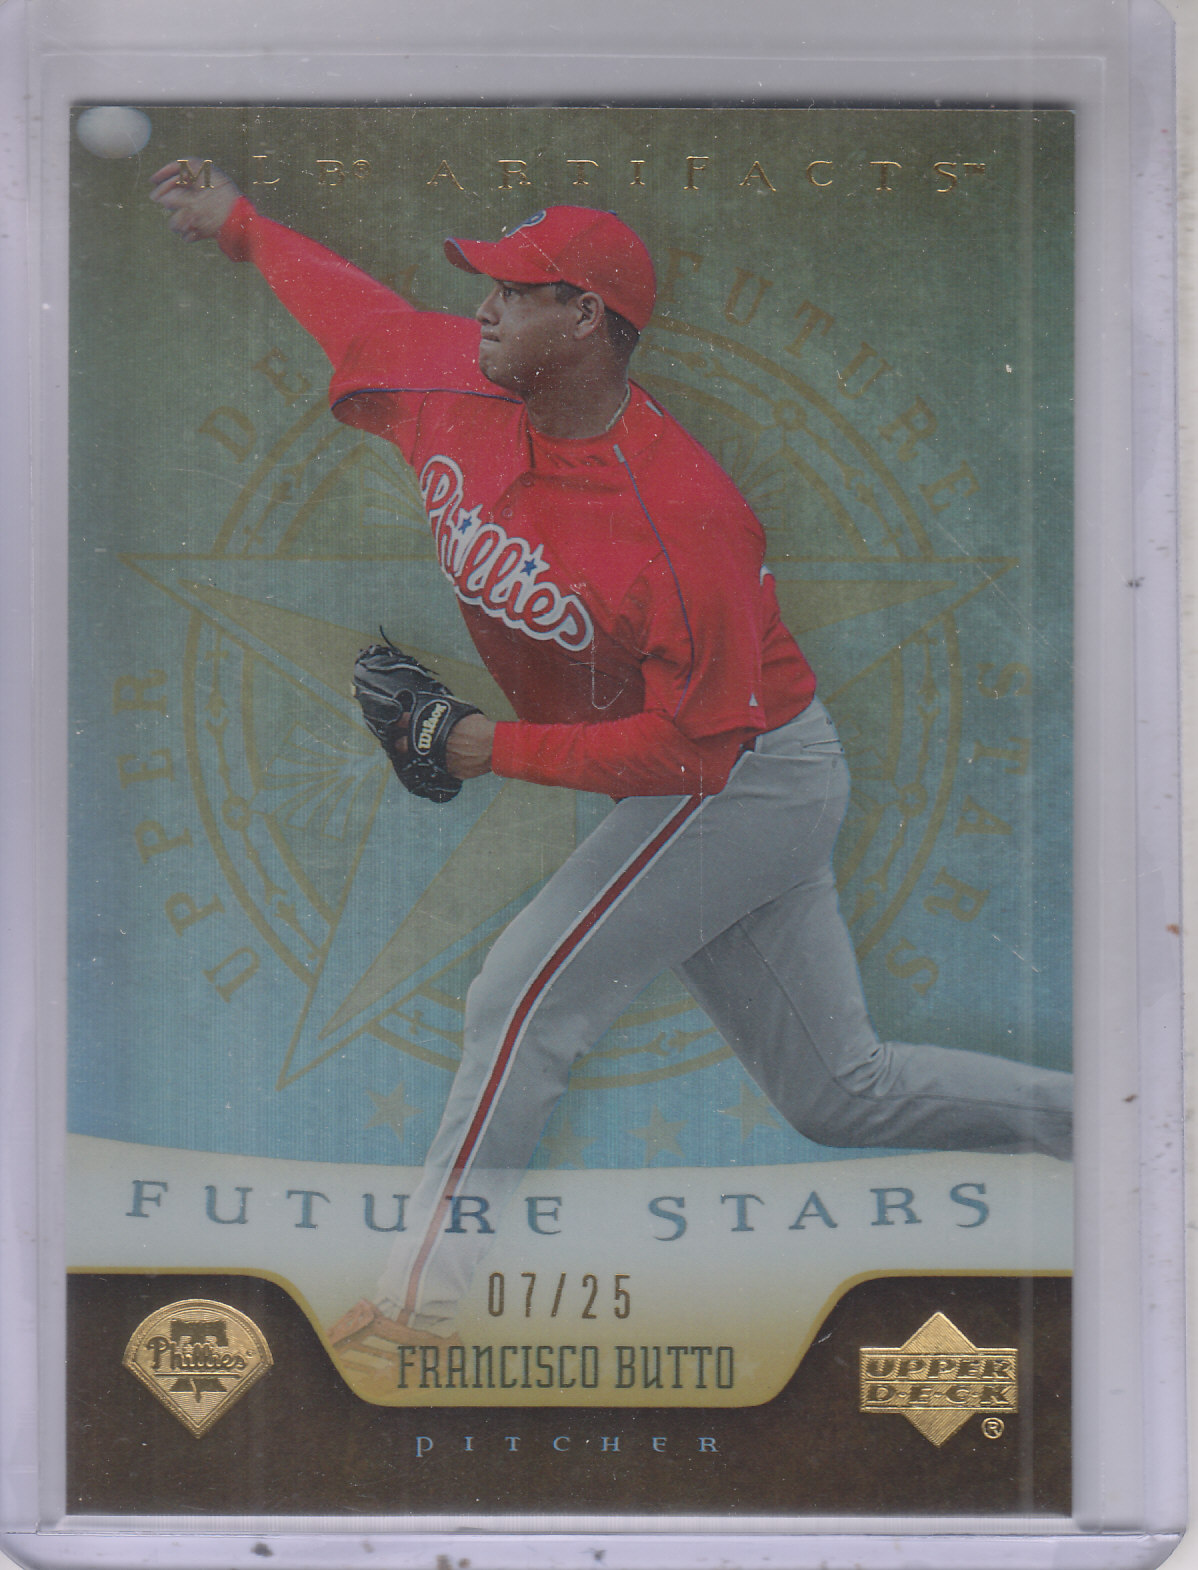 2005 Artifacts Rainbow Gold #223 Francisco Butto FS